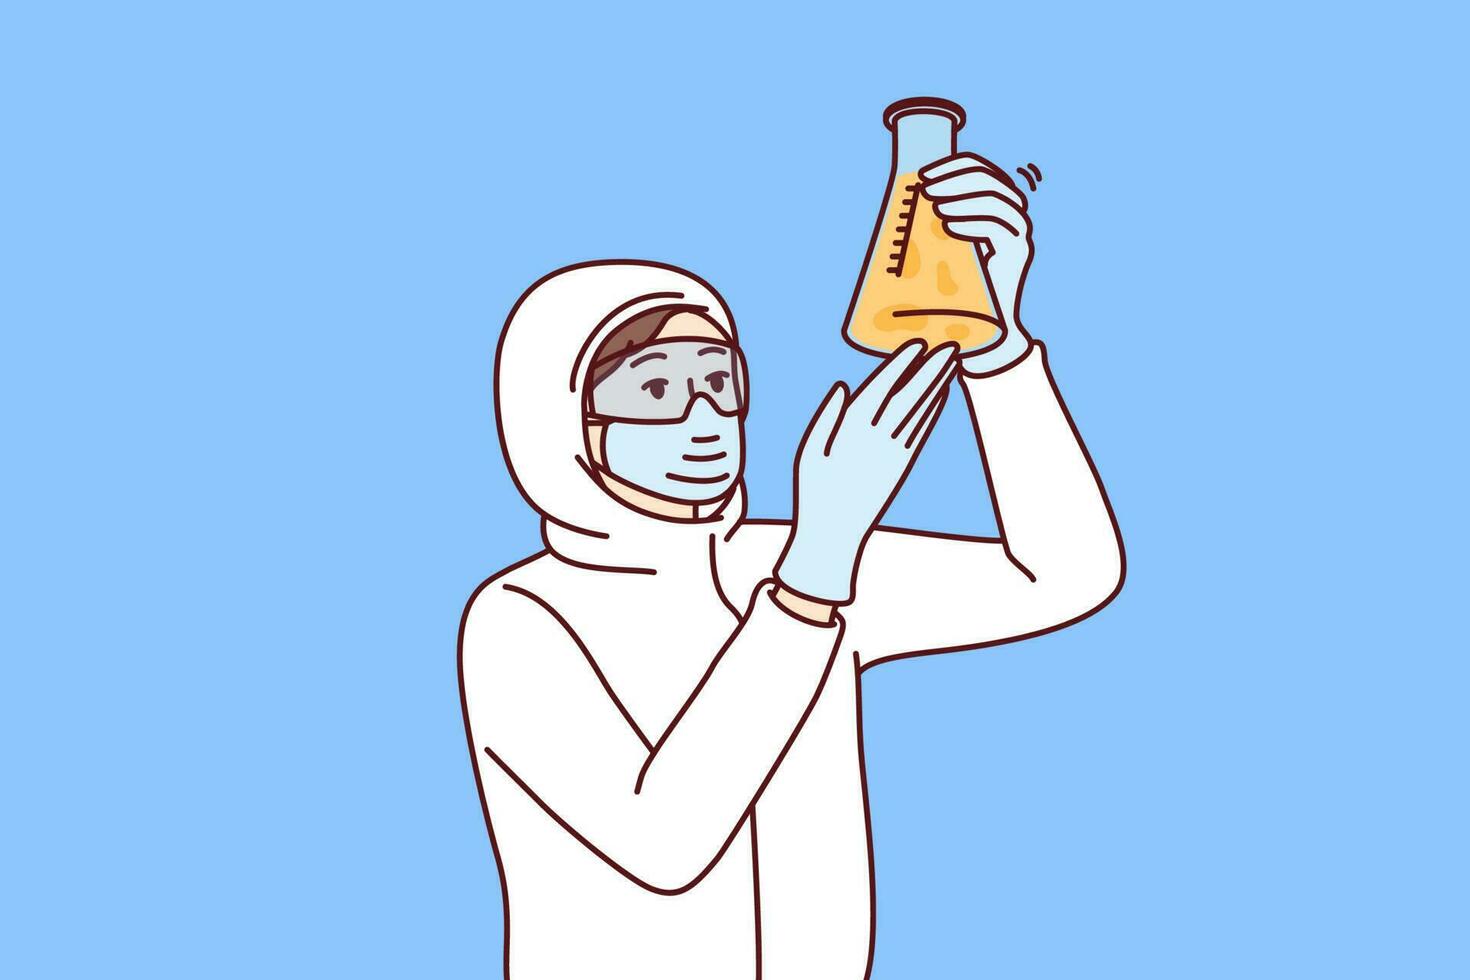 Chemist laboratory assistant holds test tube with reagent examining hazardous substance, dressed in chemical protection clothing. Female chemist examines contents of flask after synthesis vector